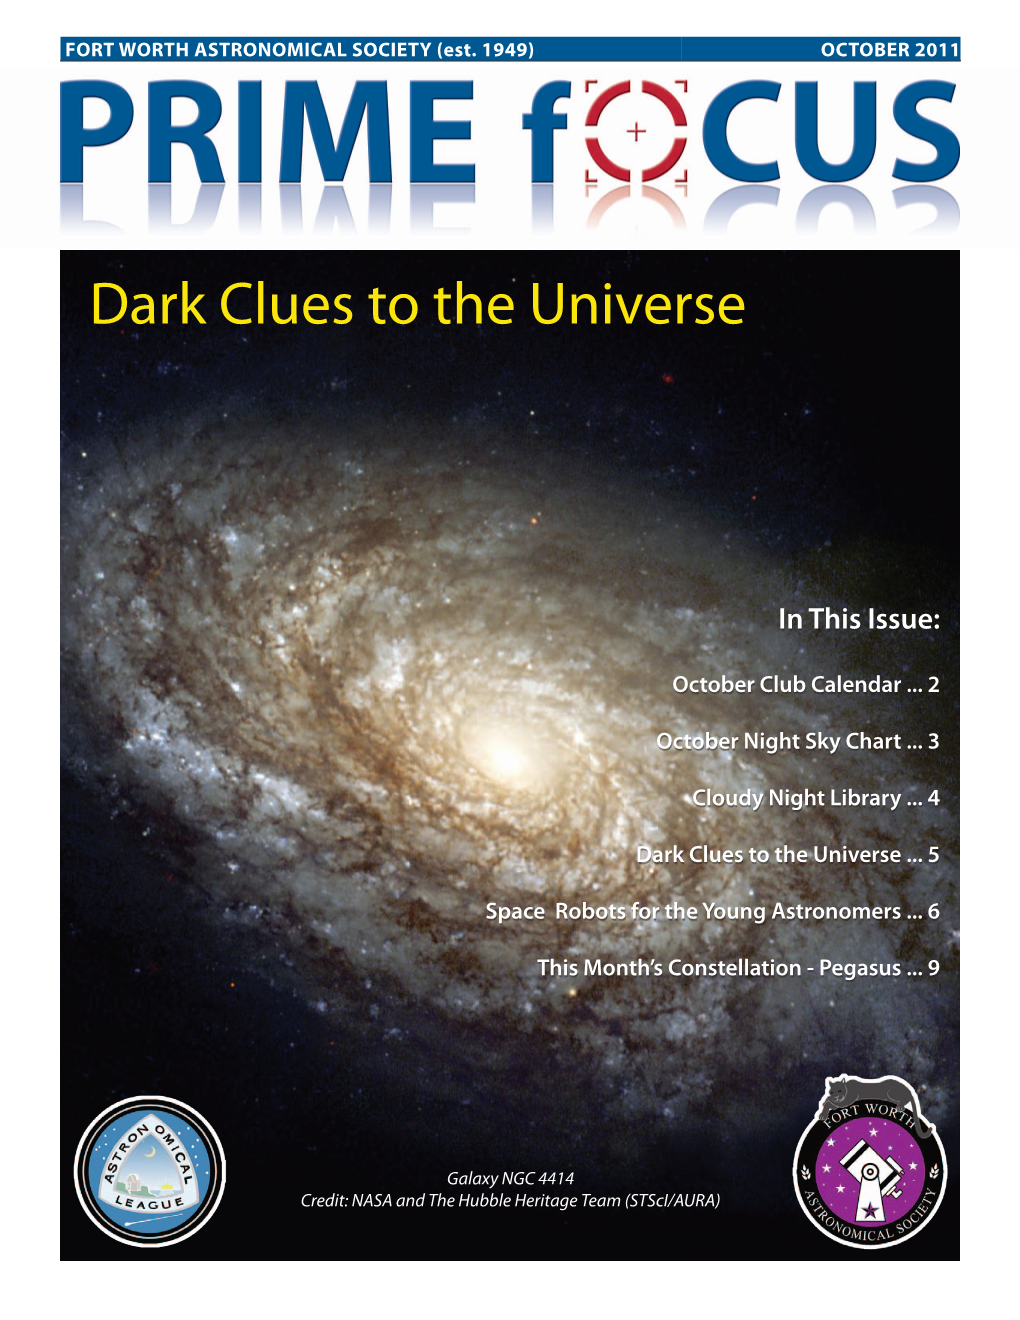 Dark Clues to the Universe